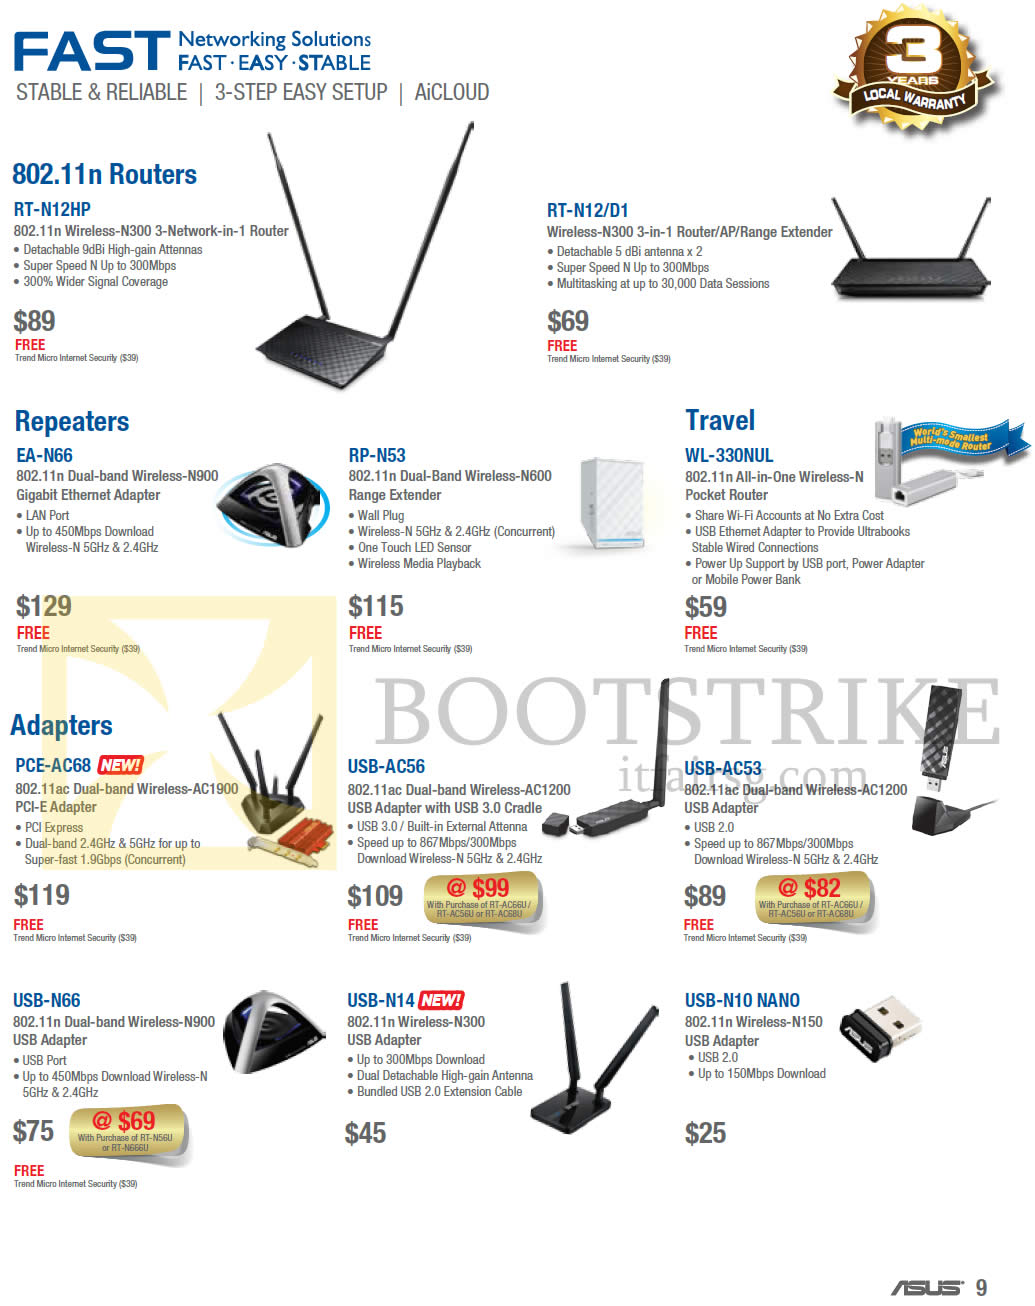 PC SHOW 2014 price list image brochure of ASUS Networking Wireless Routers, Repeaters, Adapters, RT-N12HP, N12-D1, EA-N66, RP-N53, WL-330NUL, PCE-AC68, USB-AC56, AC53, N66, N14, N10 Nano